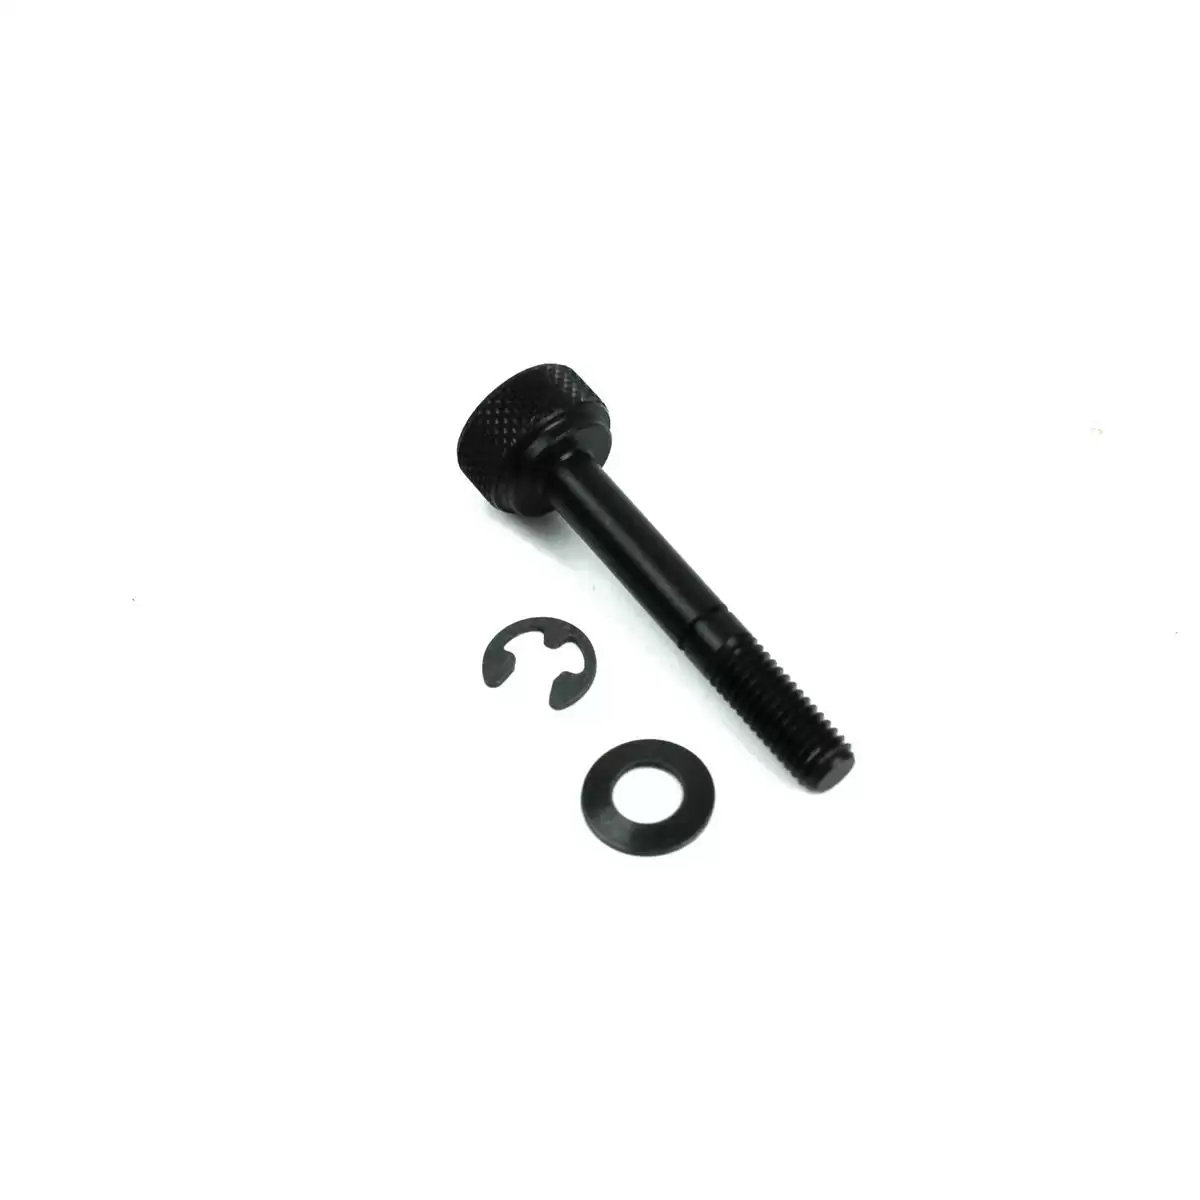 Ebike E-P3 battery fixing screw with seeger and springs - image